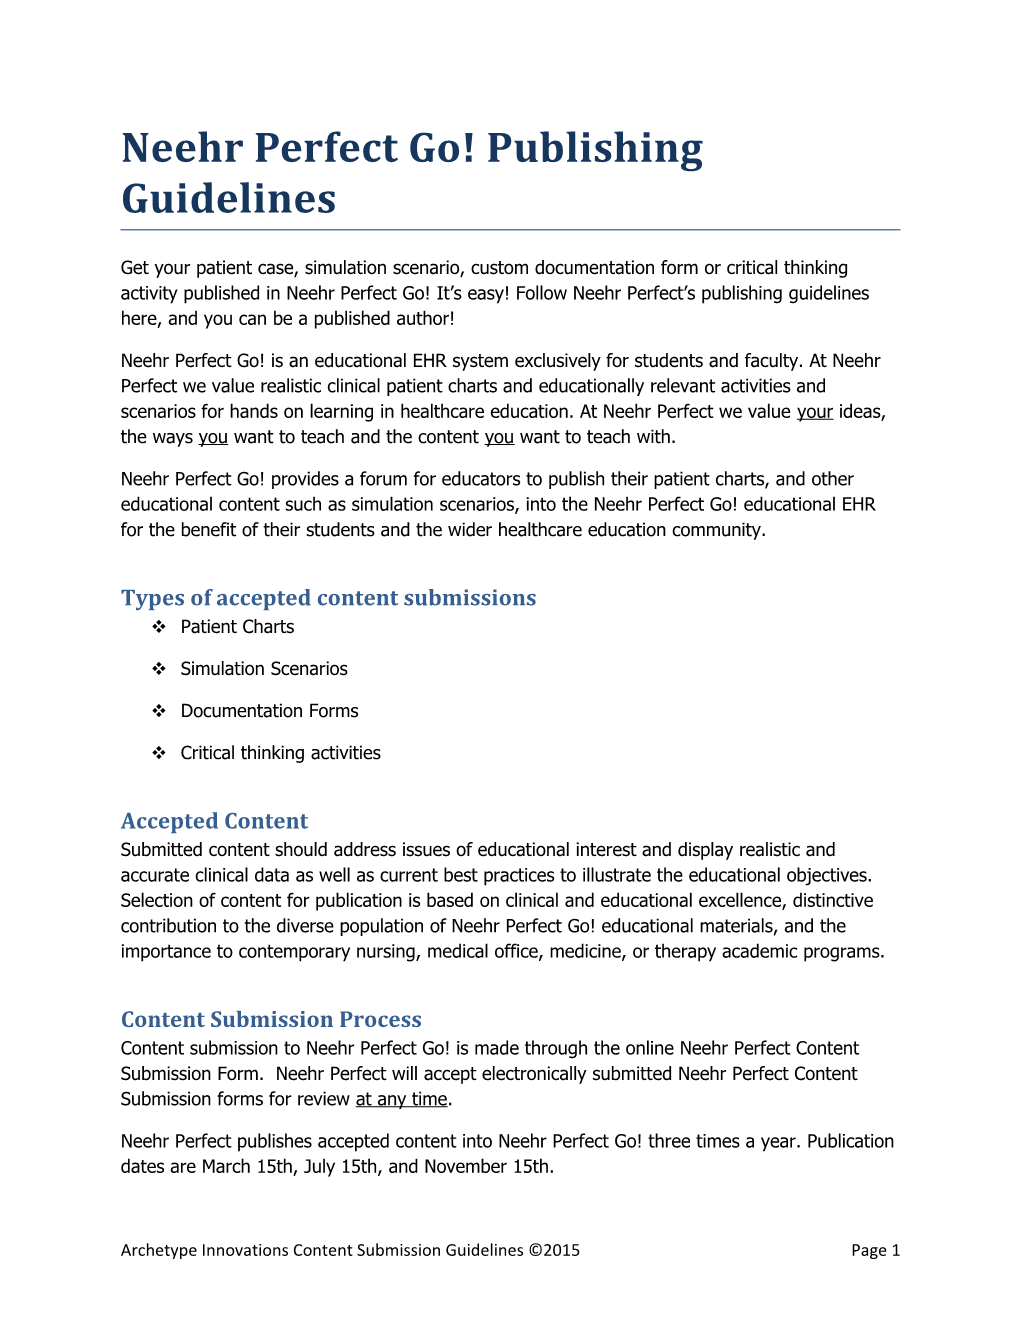 Neehr Perfect Go! Publishing Guidelines